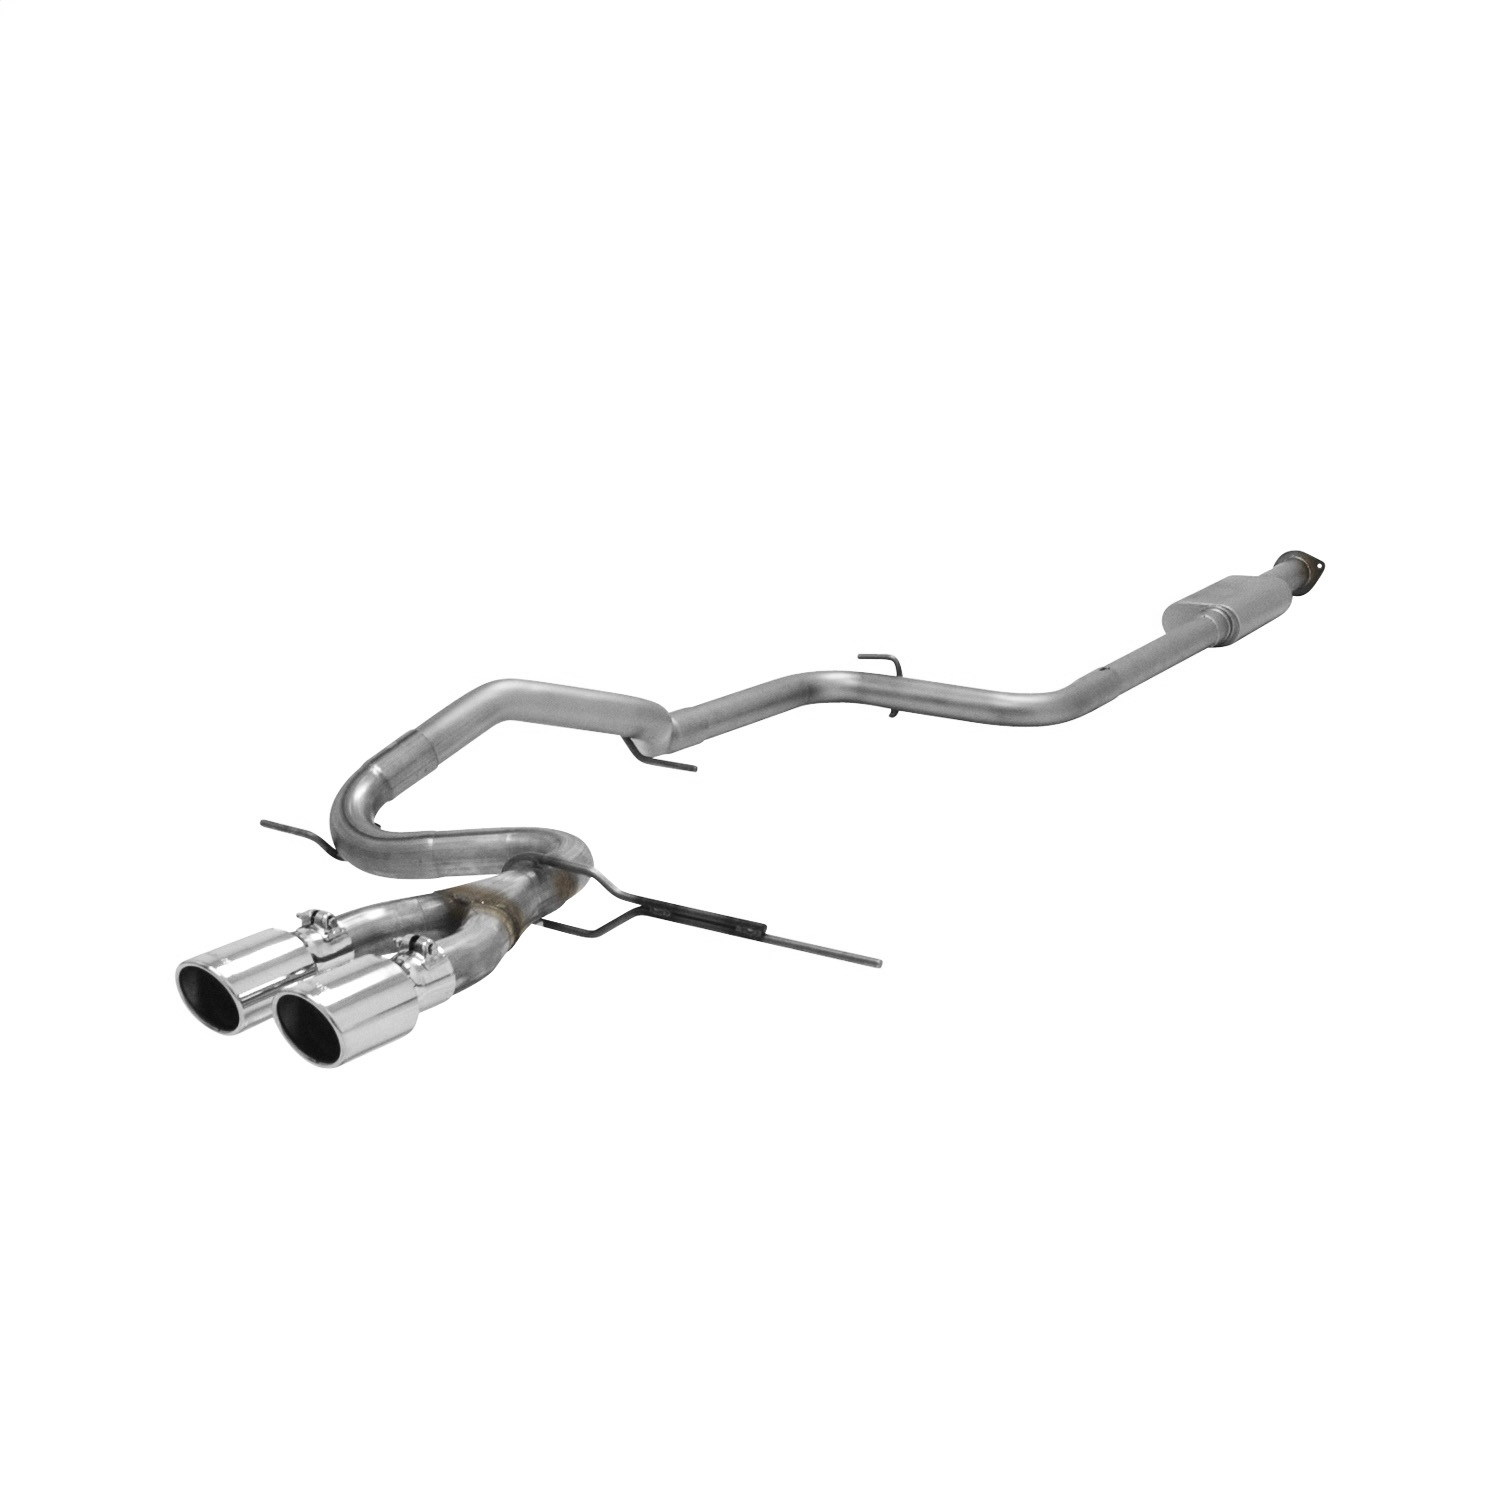 Flowmaster Flowmaster 817637 American Thunder Cat Back Exhaust System Fits 13-14 Focus